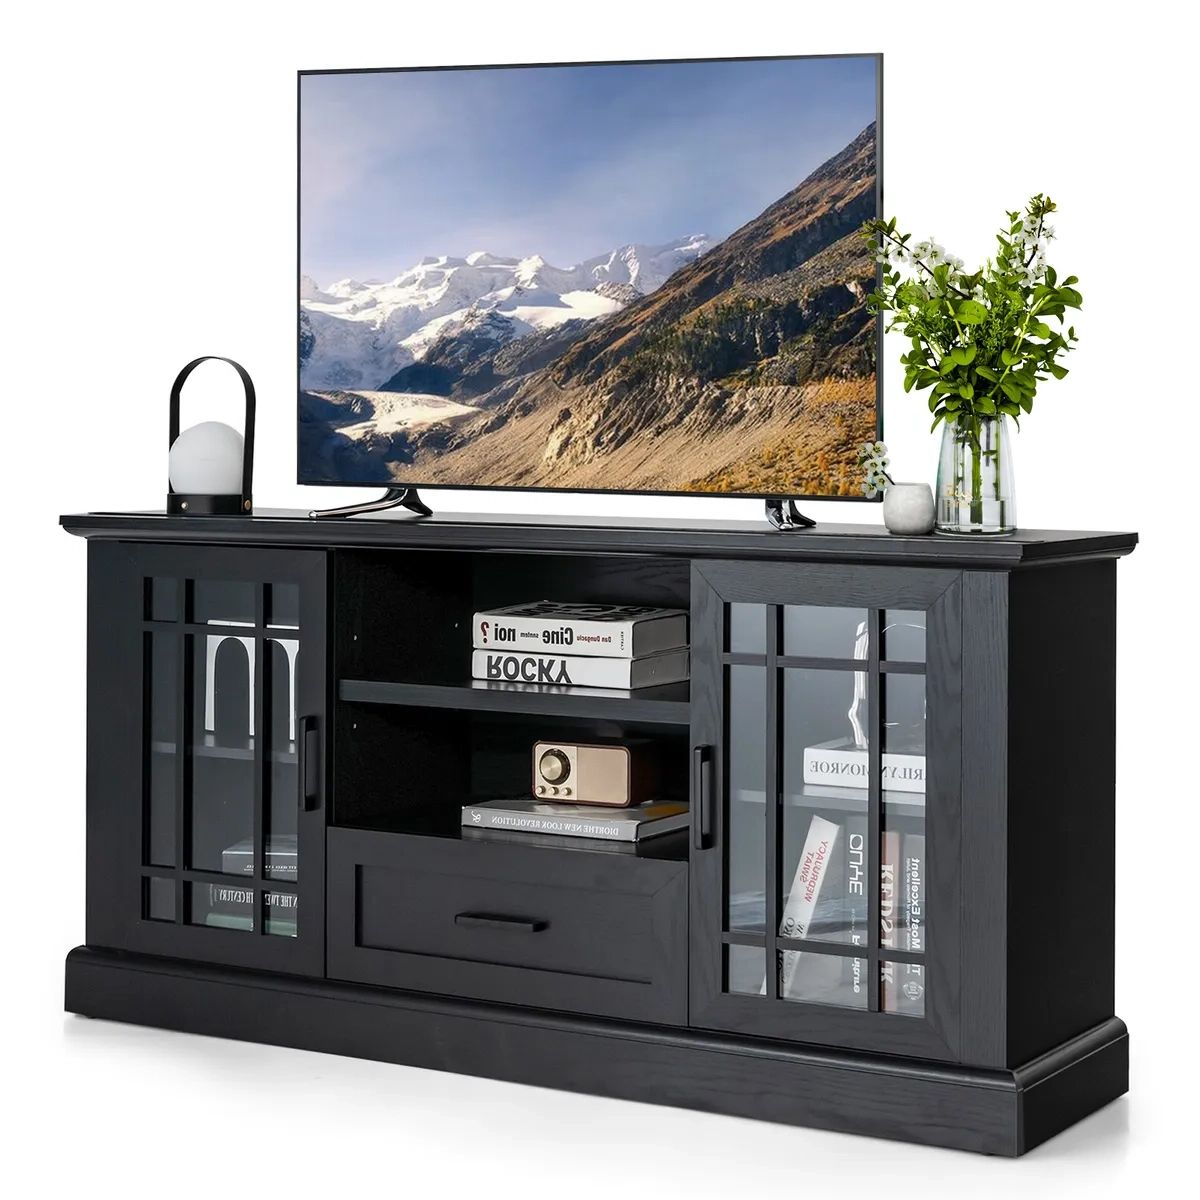 Multi Function Tv Stand W/ 2 Side Cabinets & Large Drawer & 2 Open Shelves  Black | Ebay Pertaining To Tv Stands With 2 Doors And 2 Open Shelves (View 12 of 20)